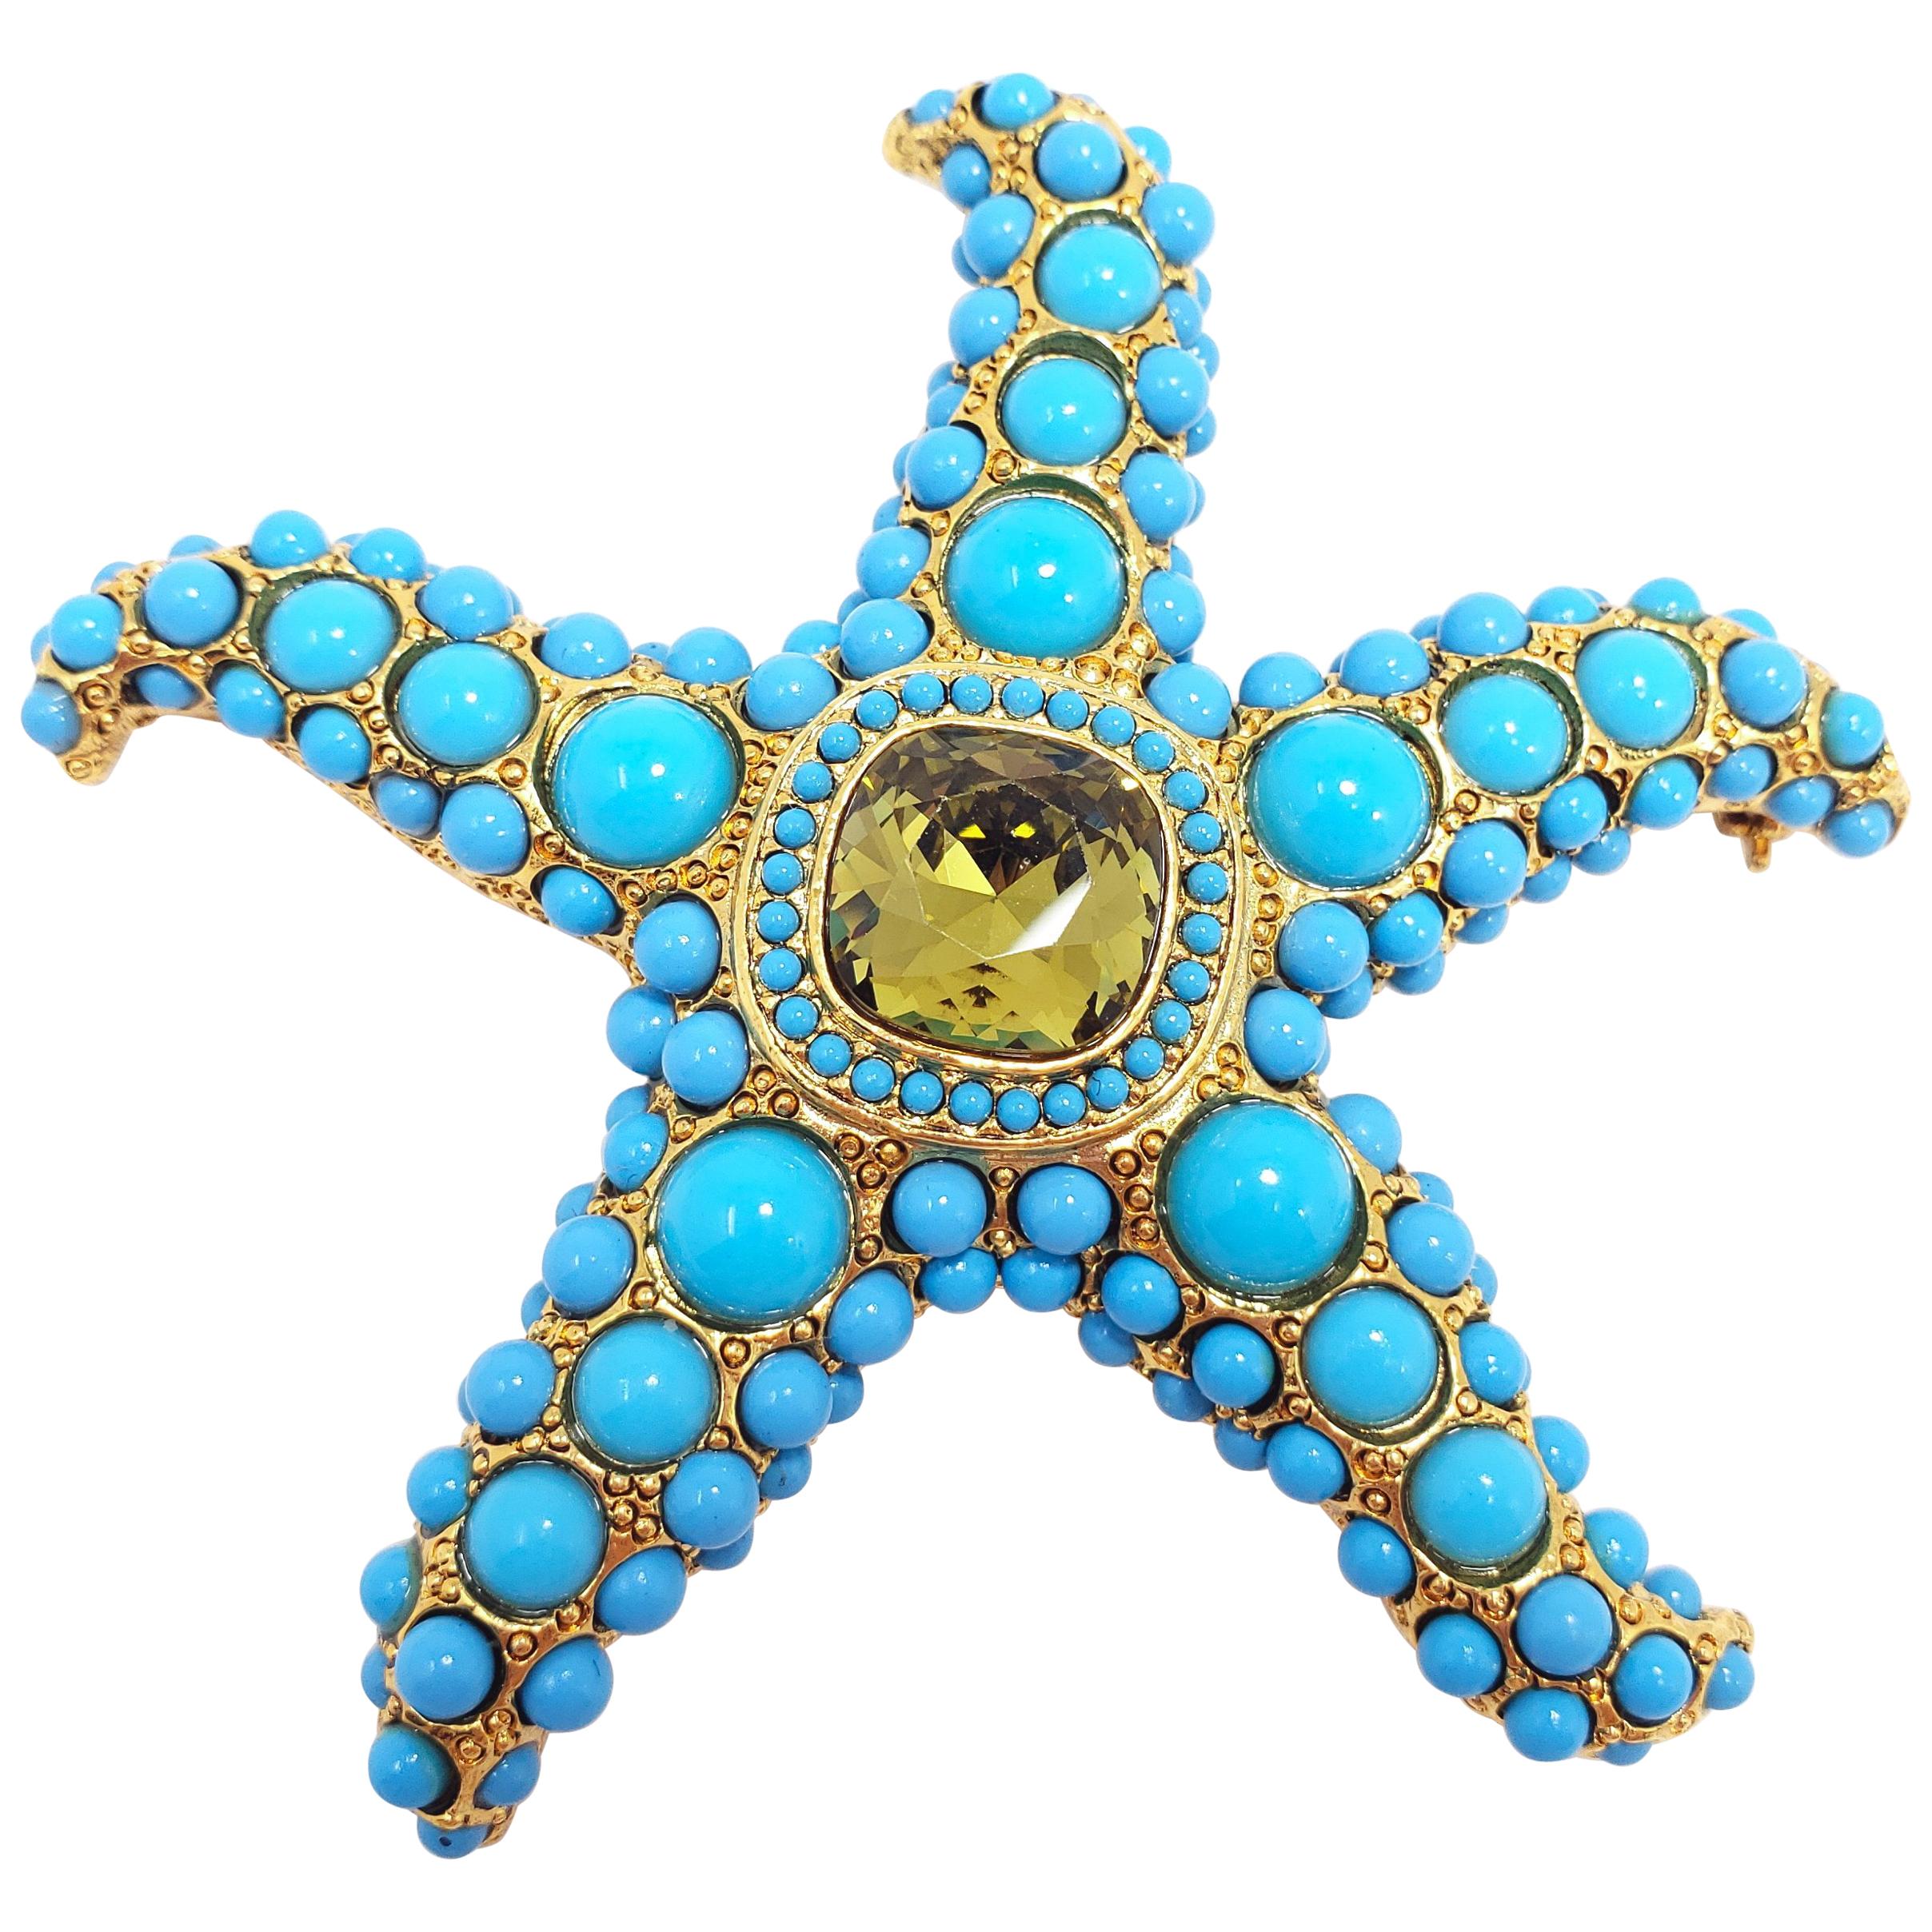 KJL Kenneth Jay Lane Turquoise Cabochon & Olive Crystal Starfish Pin, Brooch